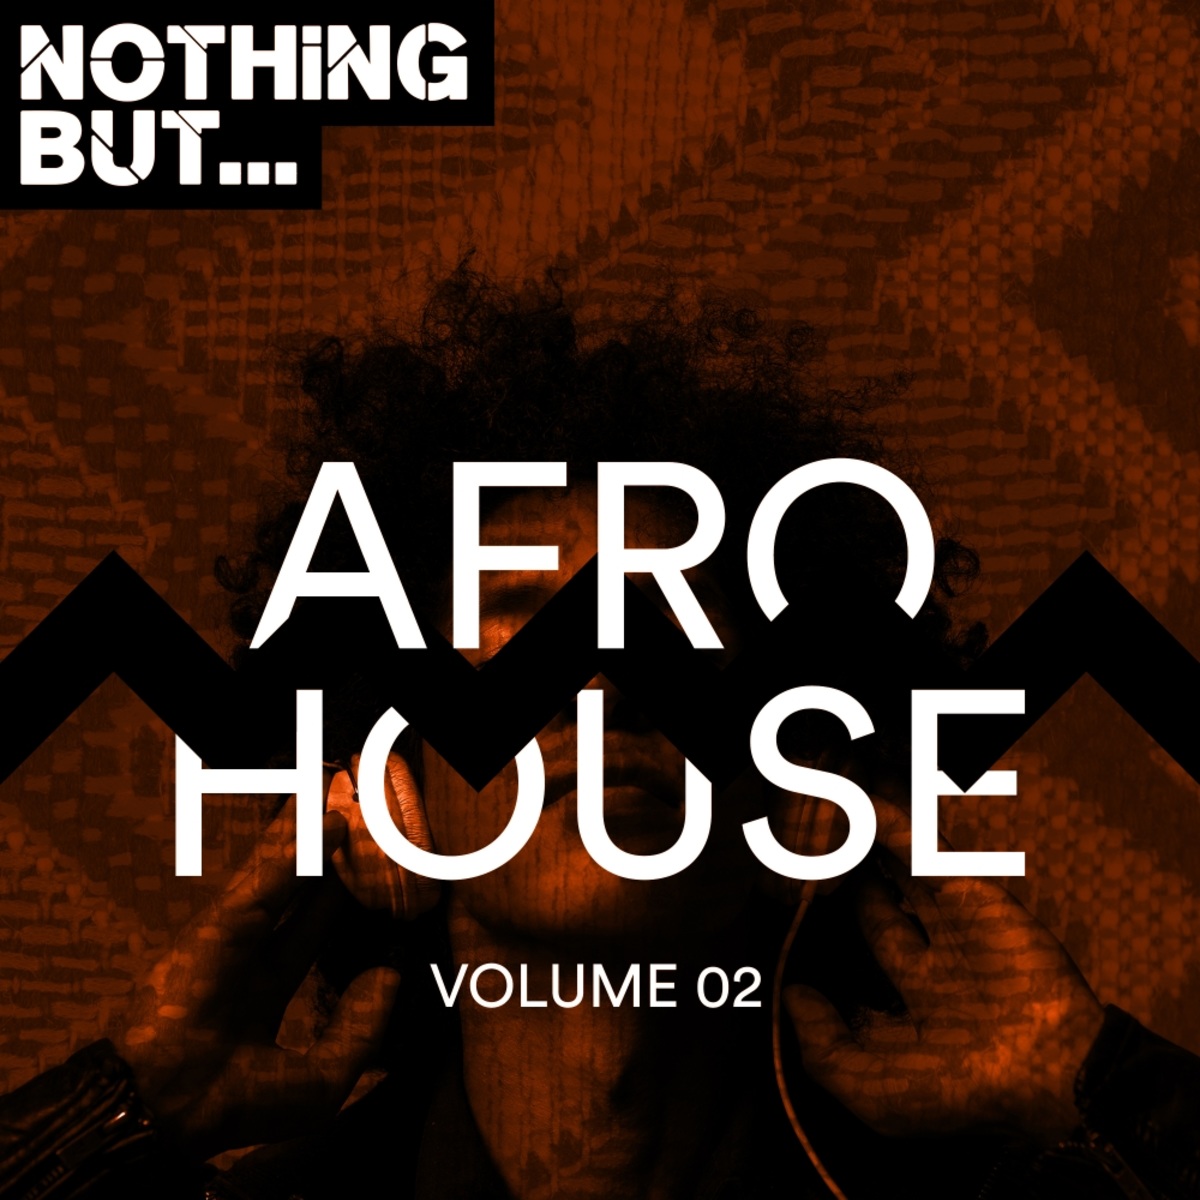 VA - Nothing But... Afro House, Vol. 02 / Nothing But